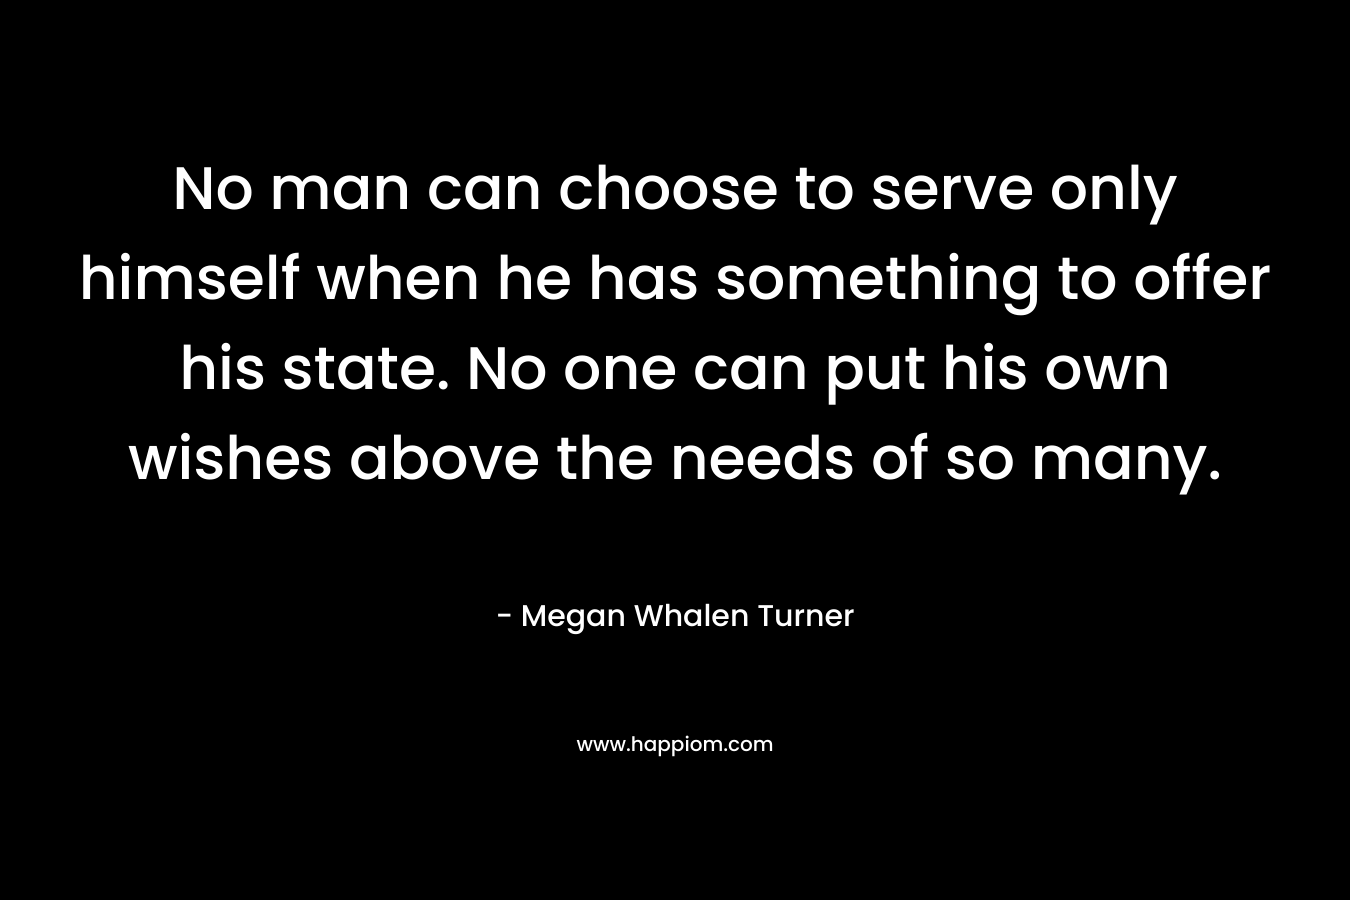 No man can choose to serve only himself when he has something to offer his state. No one can put his own wishes above the needs of so many.